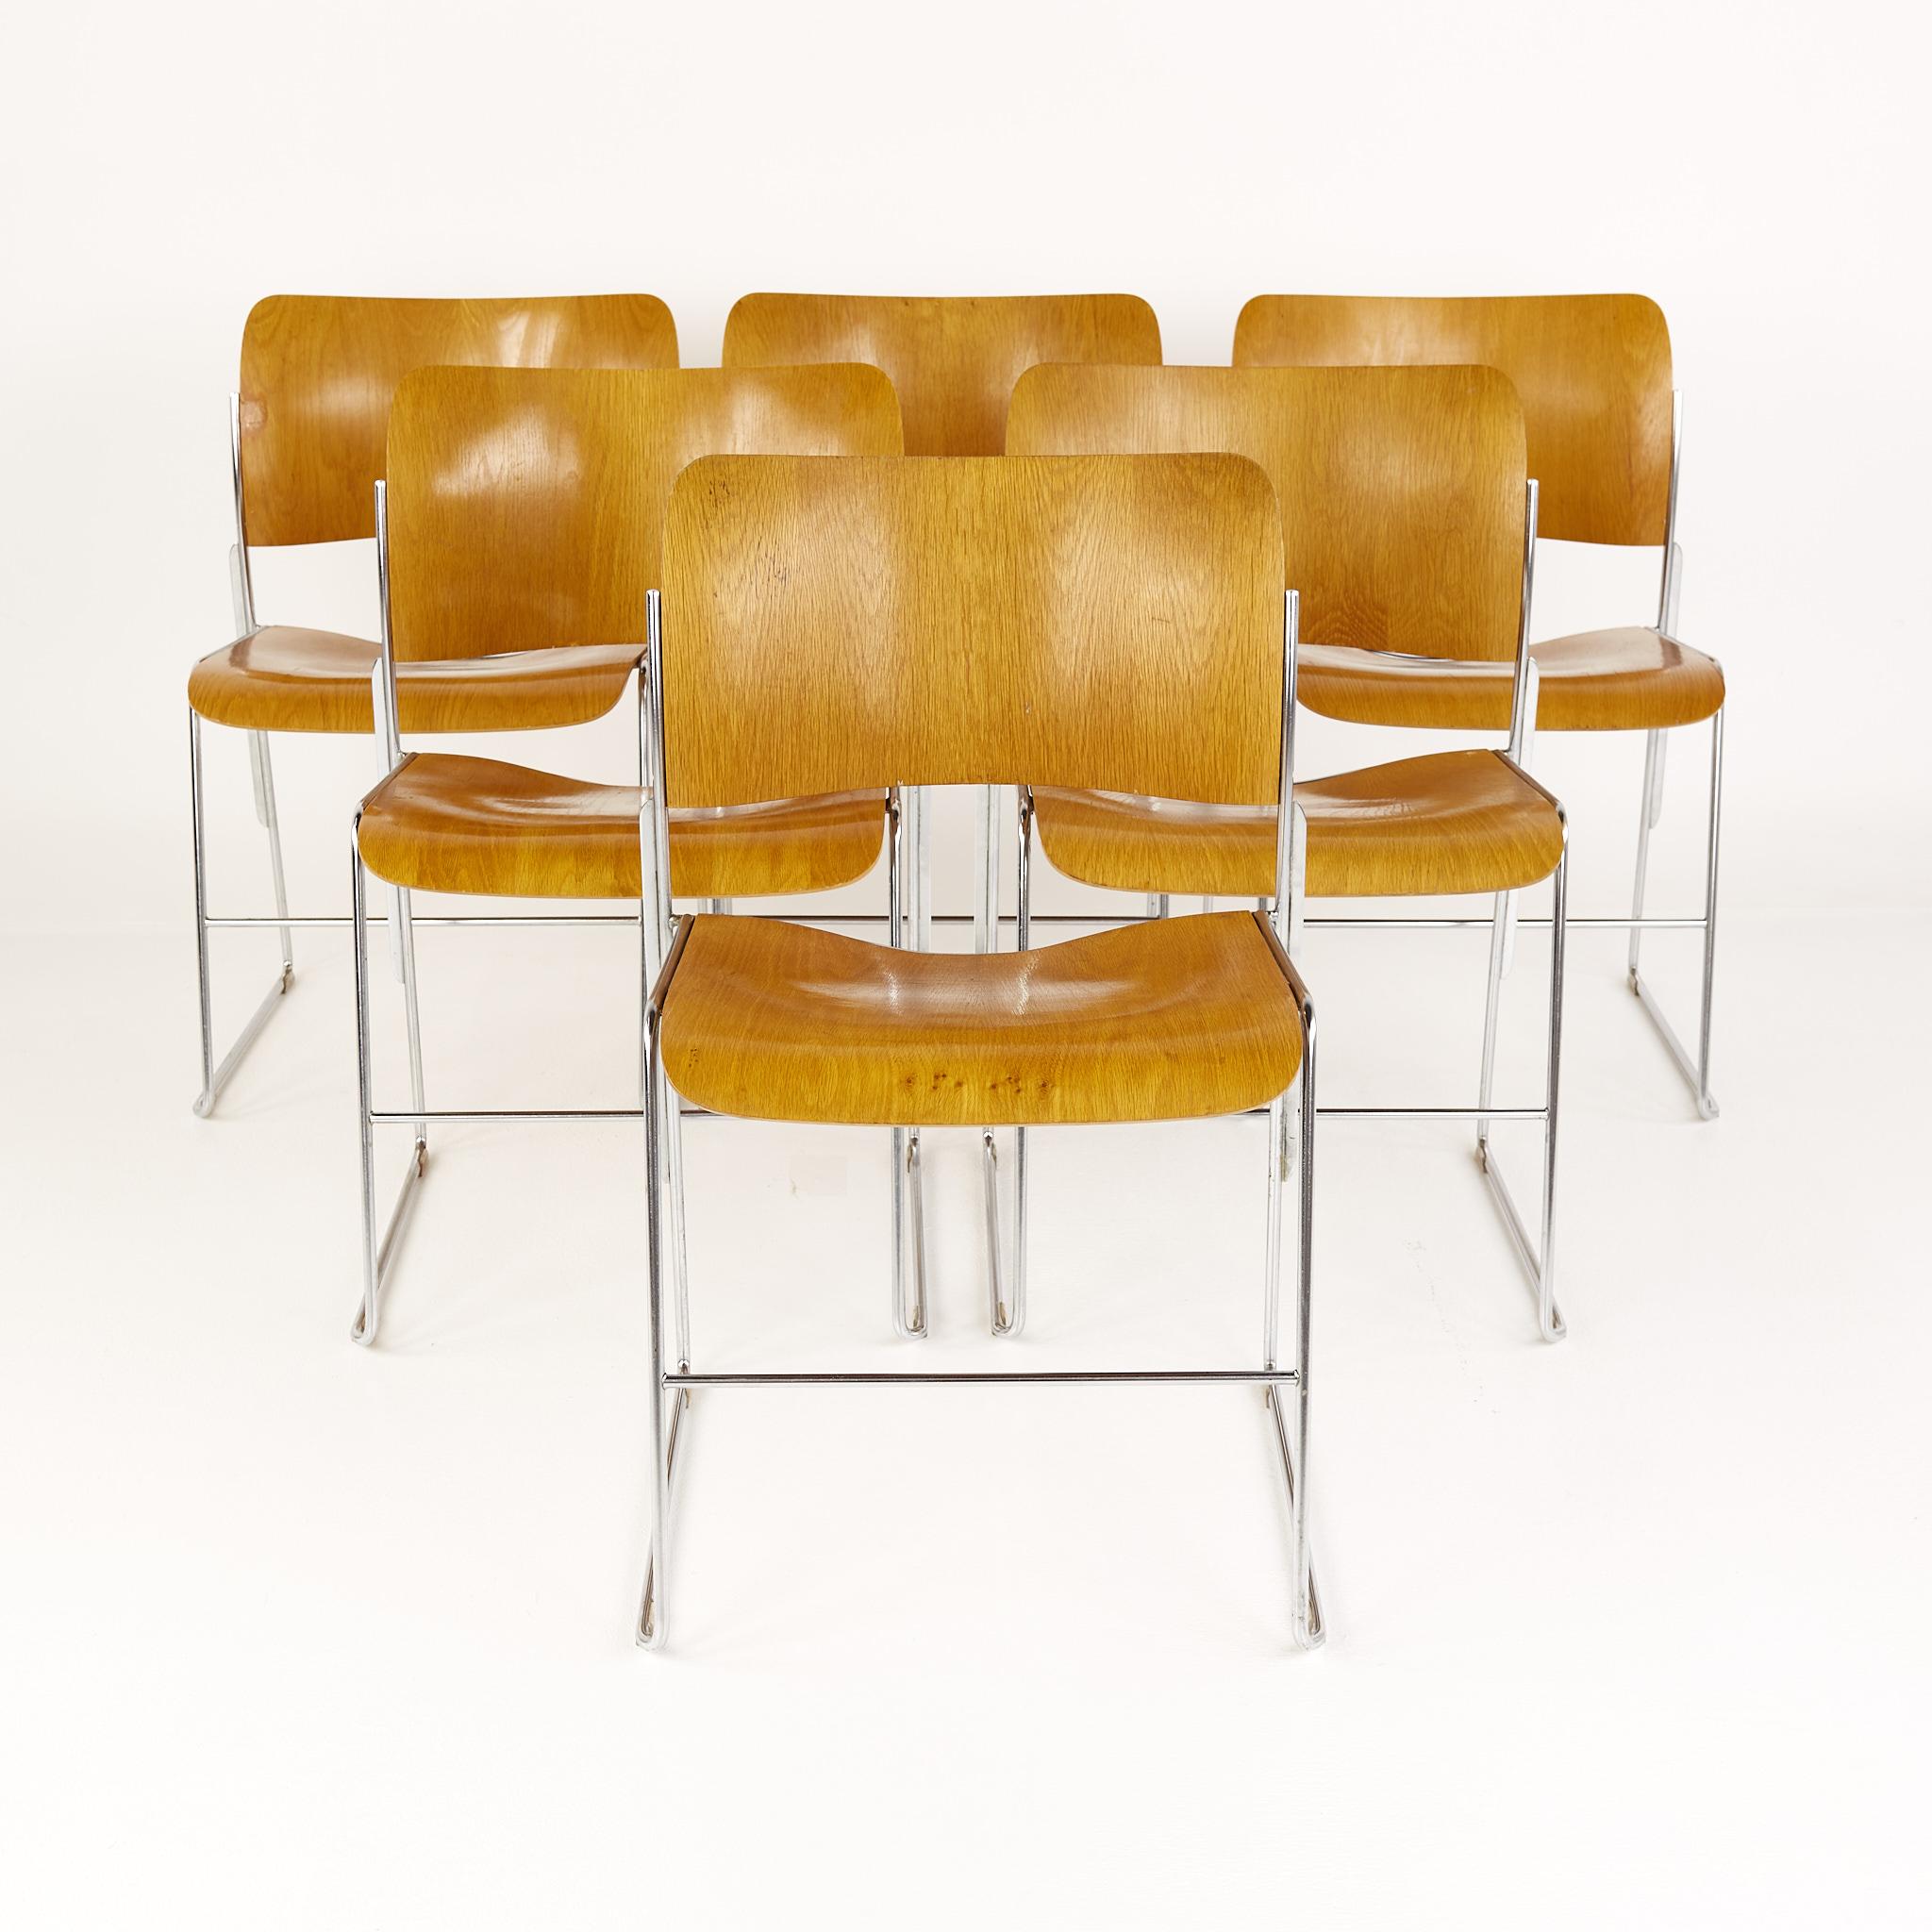 David Rowland 40/4 mid century bentwood stackable dining chairs - set of 6

These chairs measure: 20 wide x 19 deep x 29.5 inches high, with a seat height of 18 inches

?All pieces of furniture can be had in what we call restored vintage